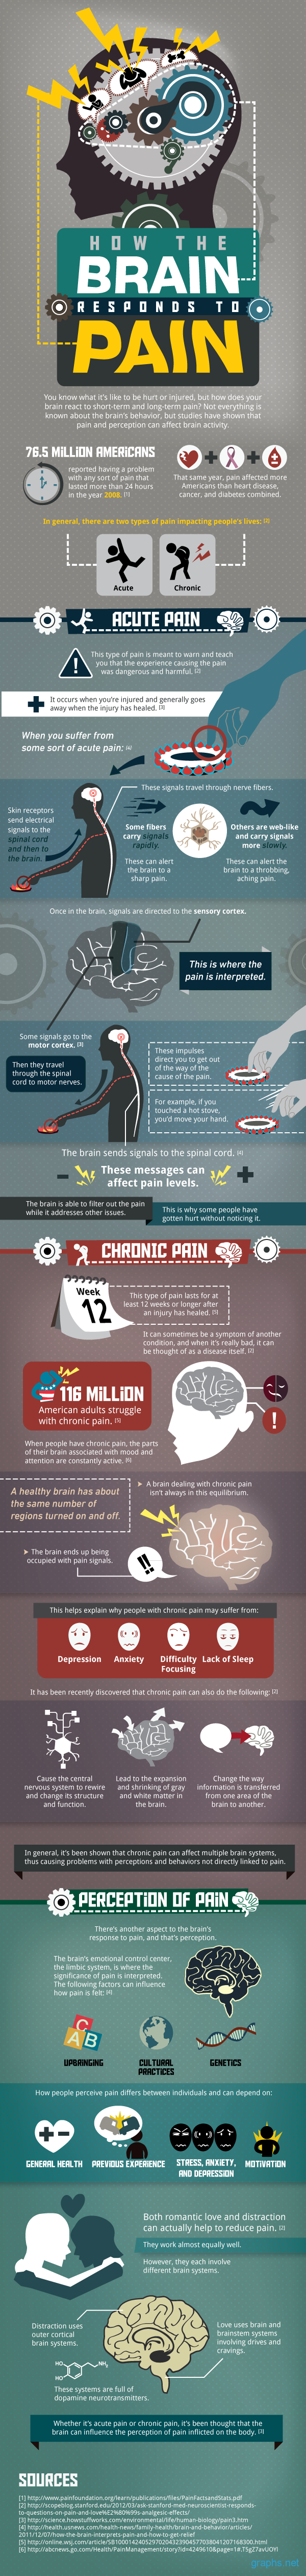 How the Brain Reacts to Pain?